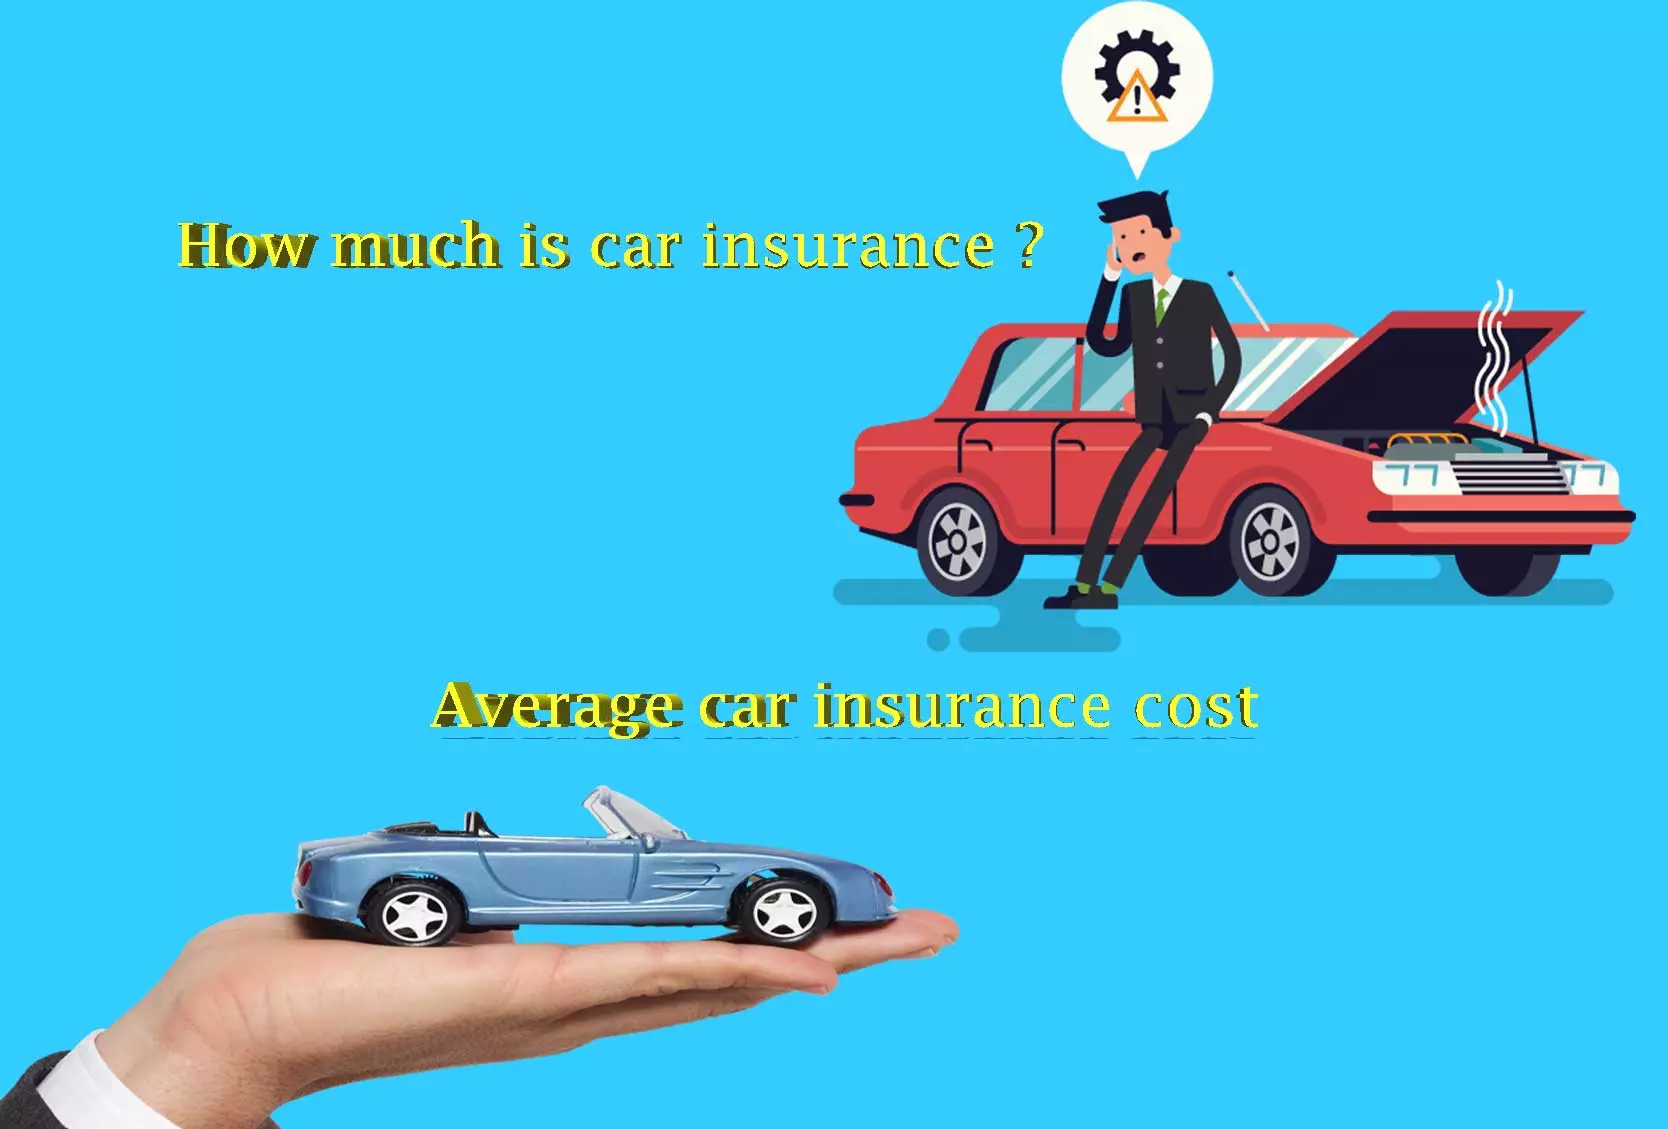 Car Insurance Cost: How Much is Car Insurance?